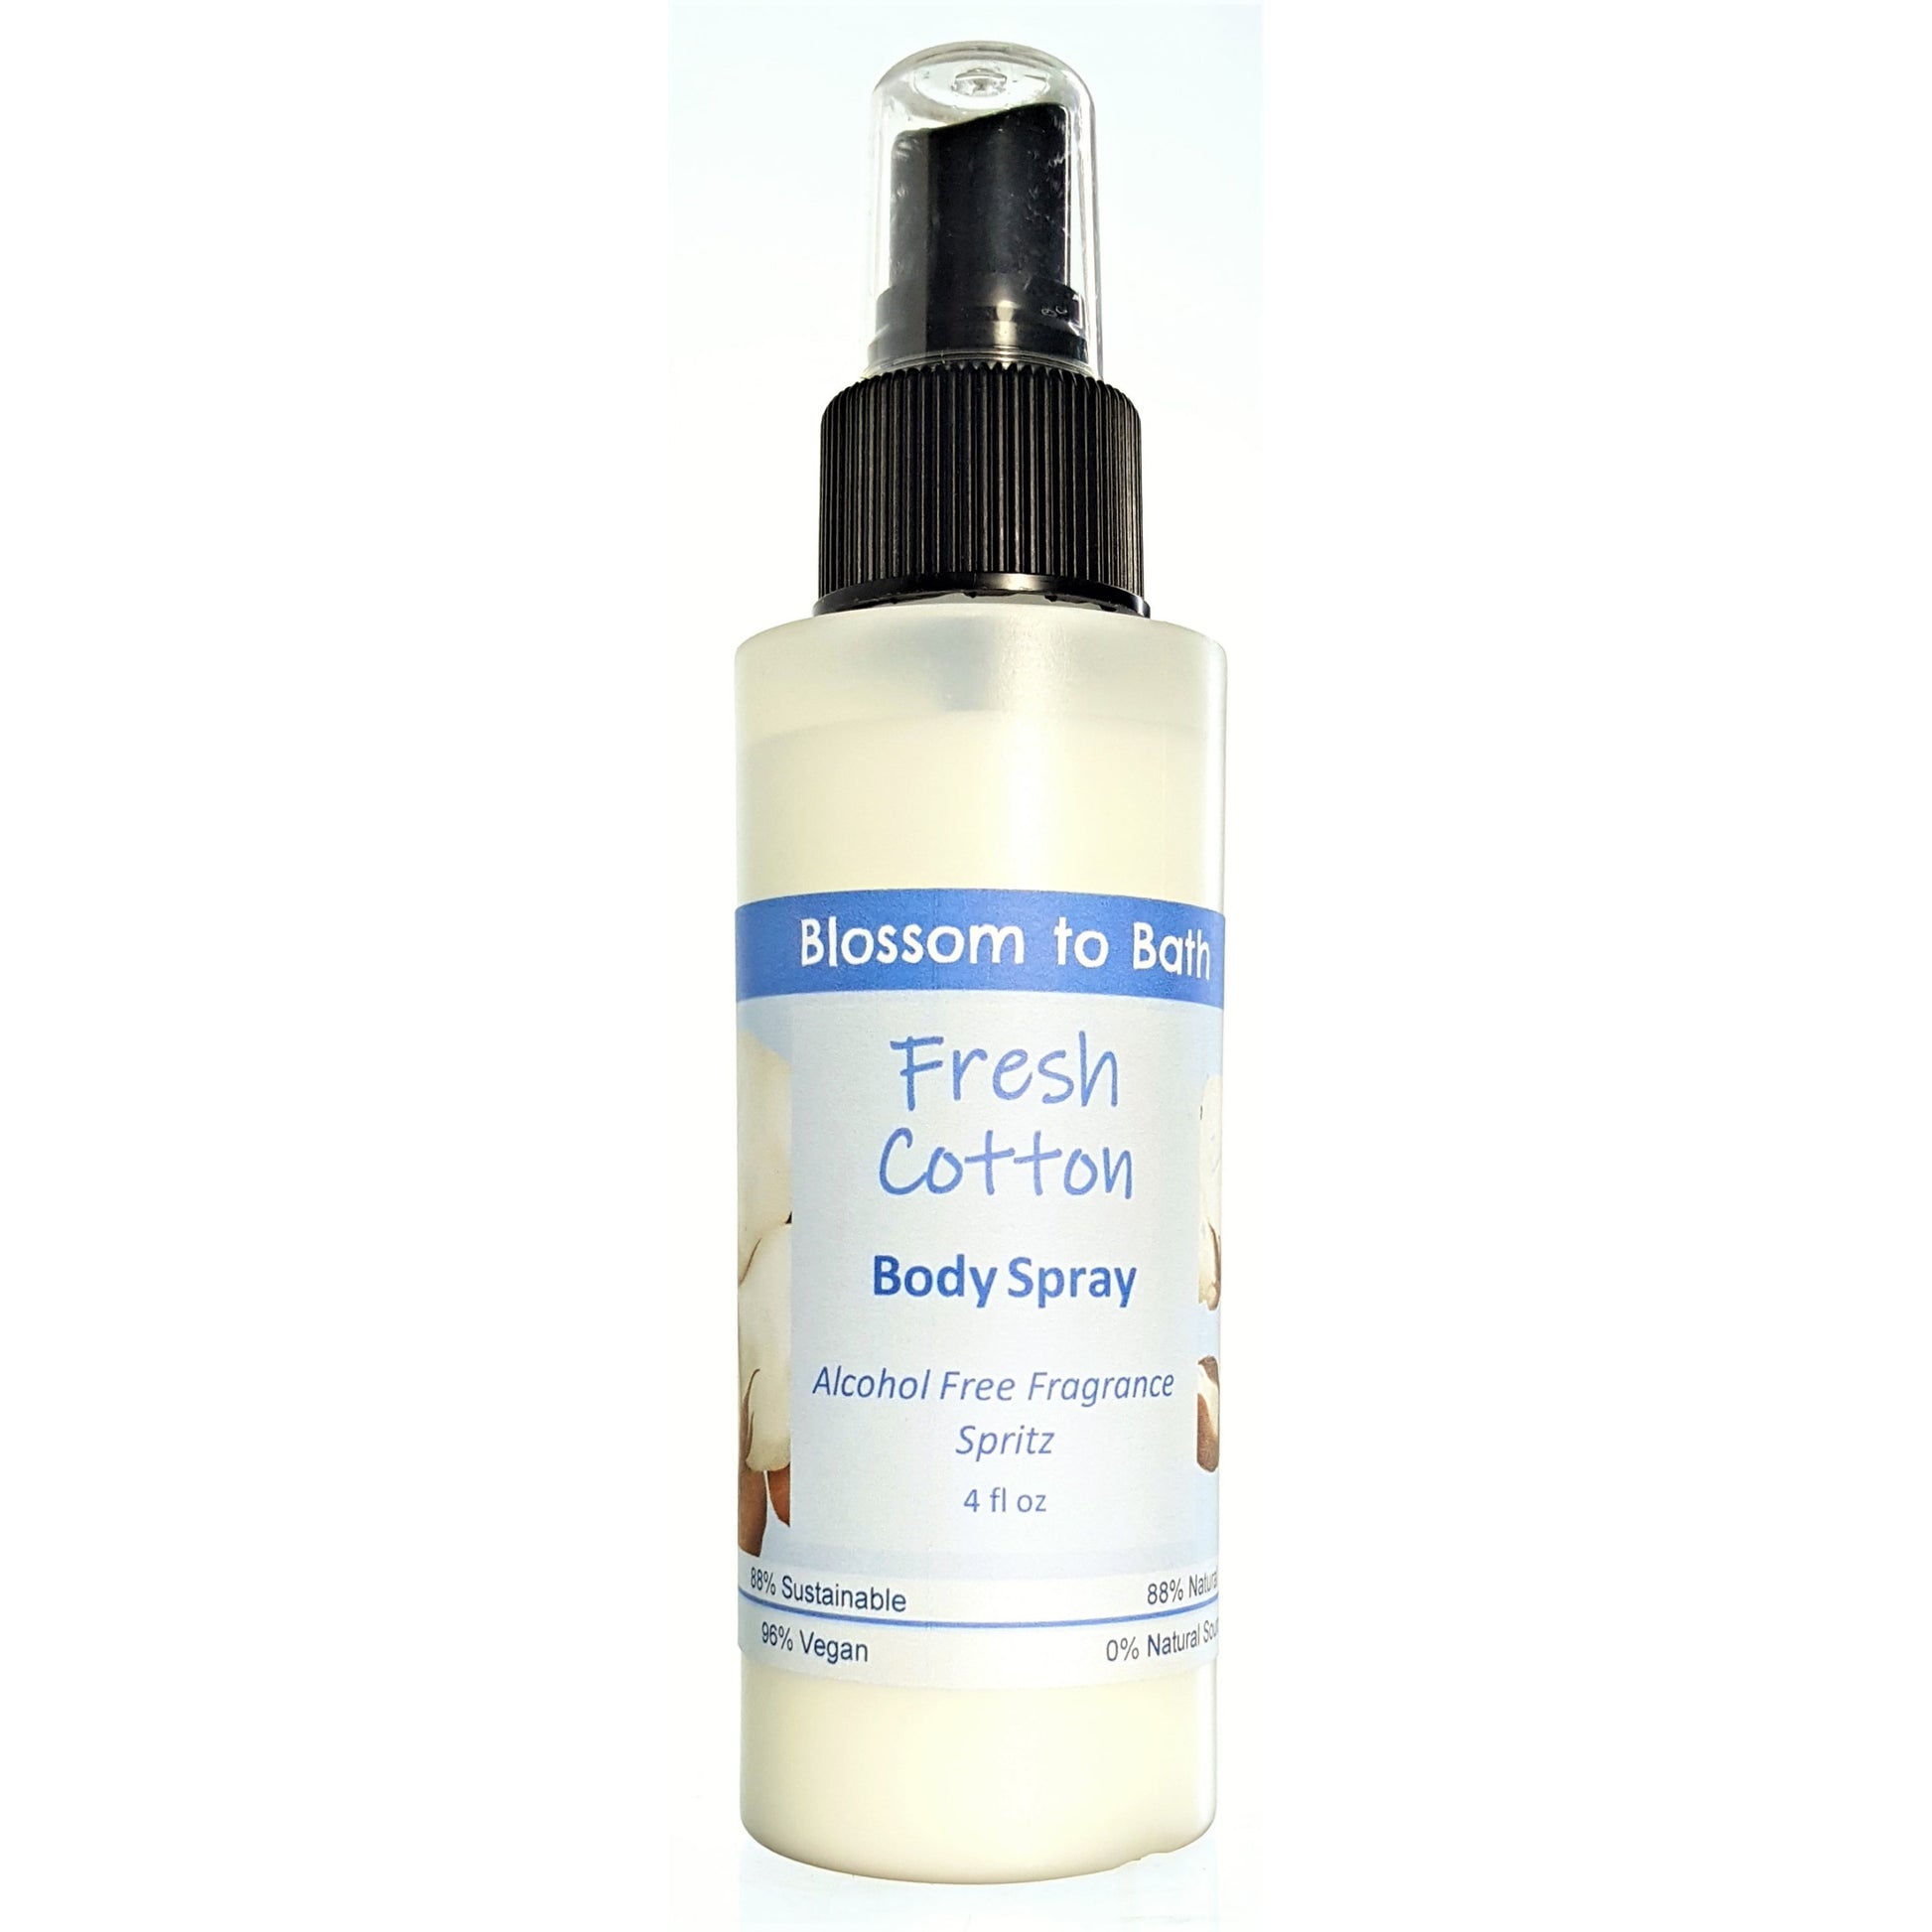 Buy Blossom to Bath Fresh Cotton Body Spray from Flowersong Soap Studio.  Natural  freshening of skin, linens, or air  Smells like clean sheets drying in a breeze of spring blossoms.